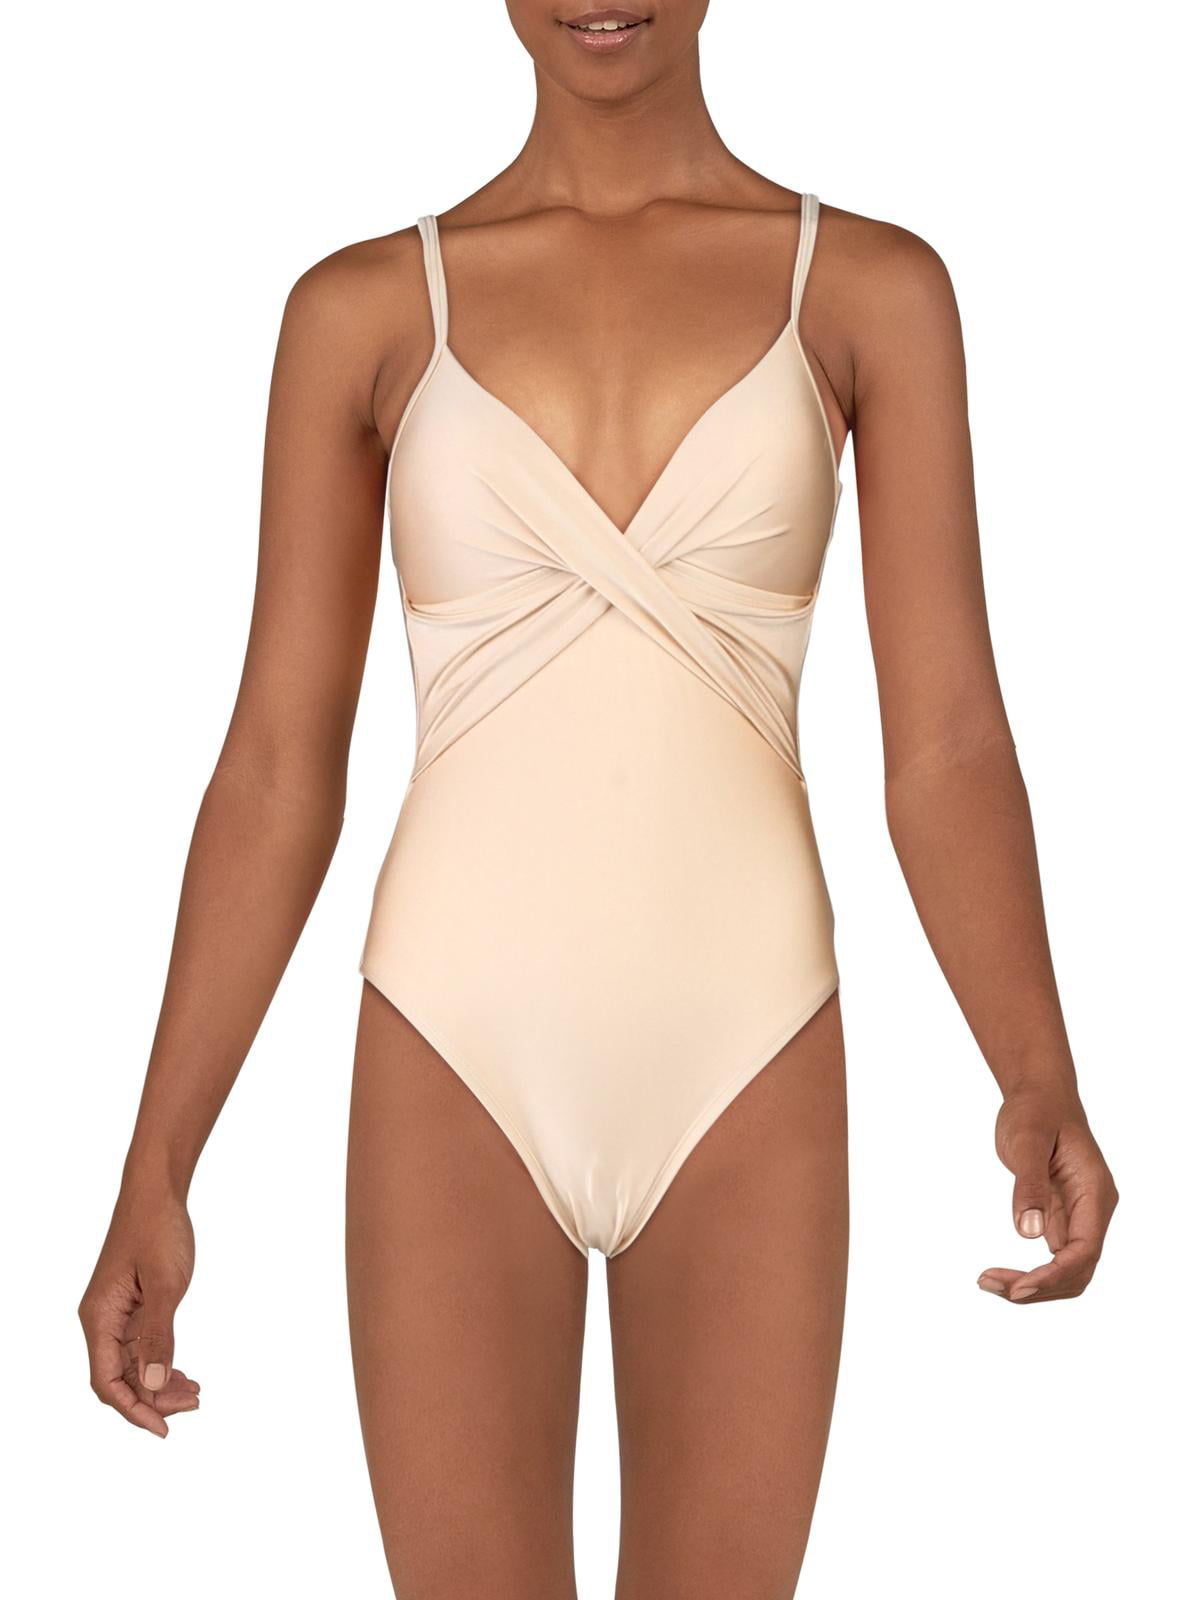 Kenneth Cole New York Womens Over The Shoulder One Piece Swimsuit 